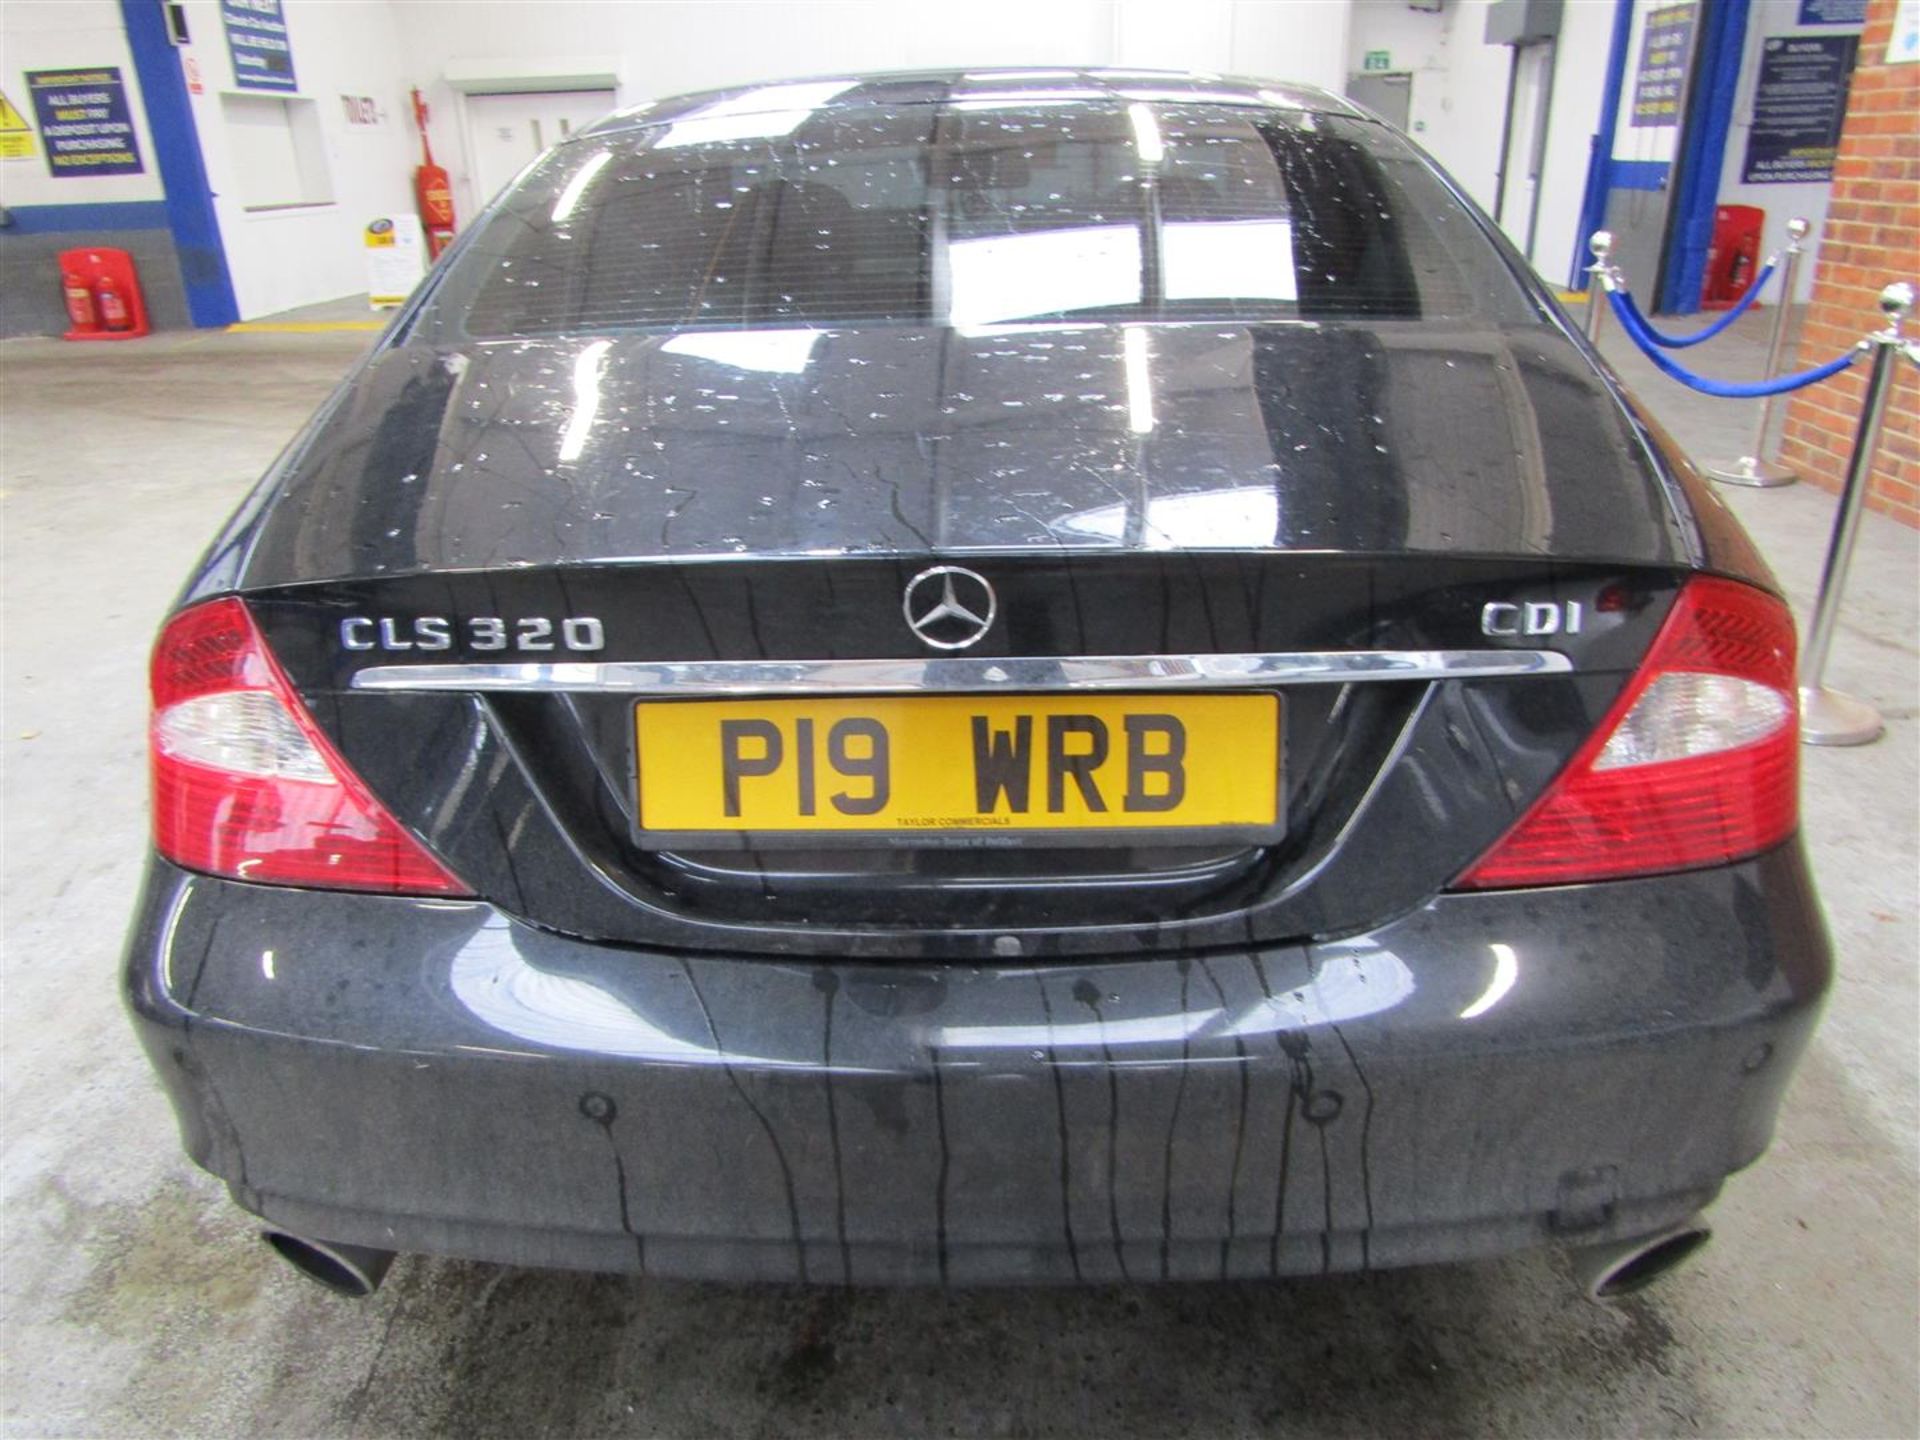 2006 Mercedes CLS 320 CDI - Image 4 of 24